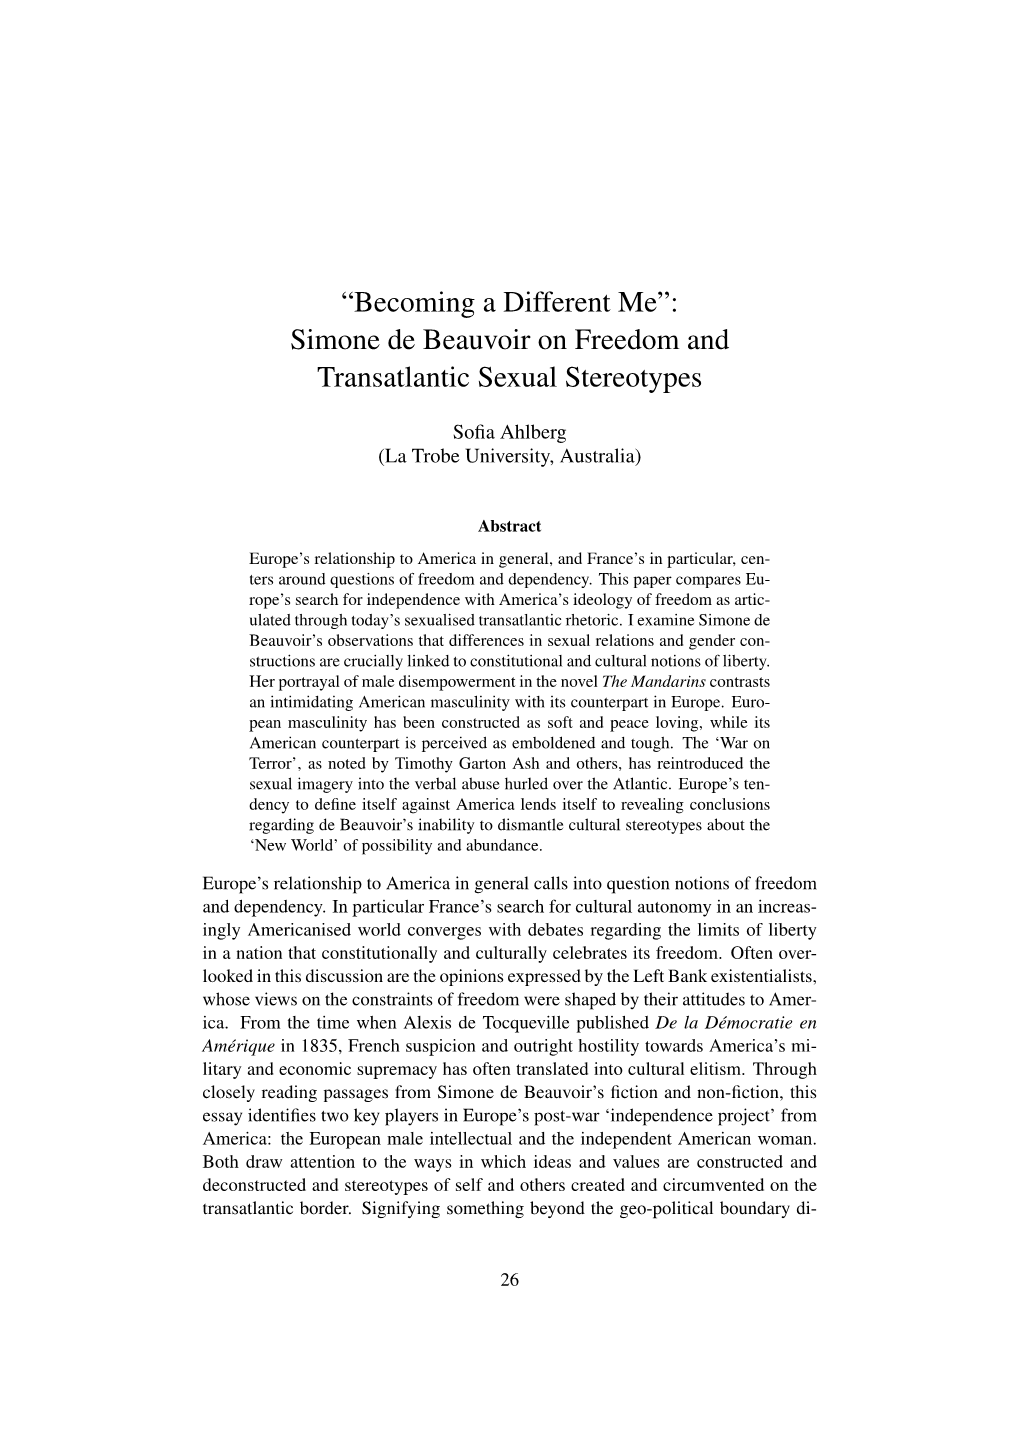 “Becoming a Different Me”: Simone De Beauvoir on Freedom and Transatlantic Sexual Stereotypes